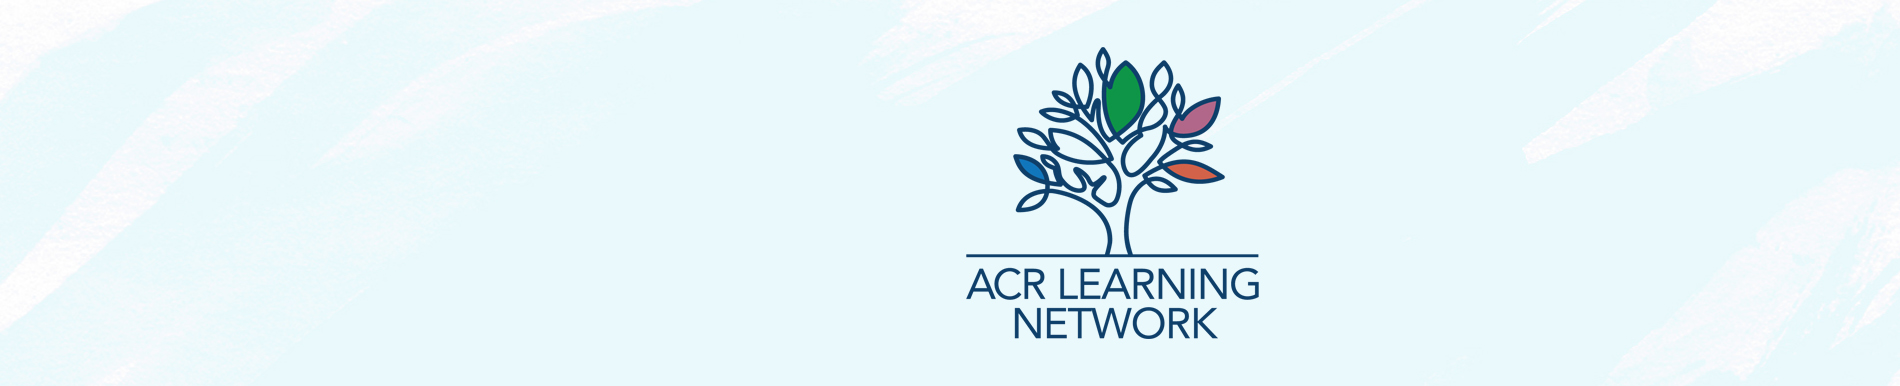 ACR Learning Network